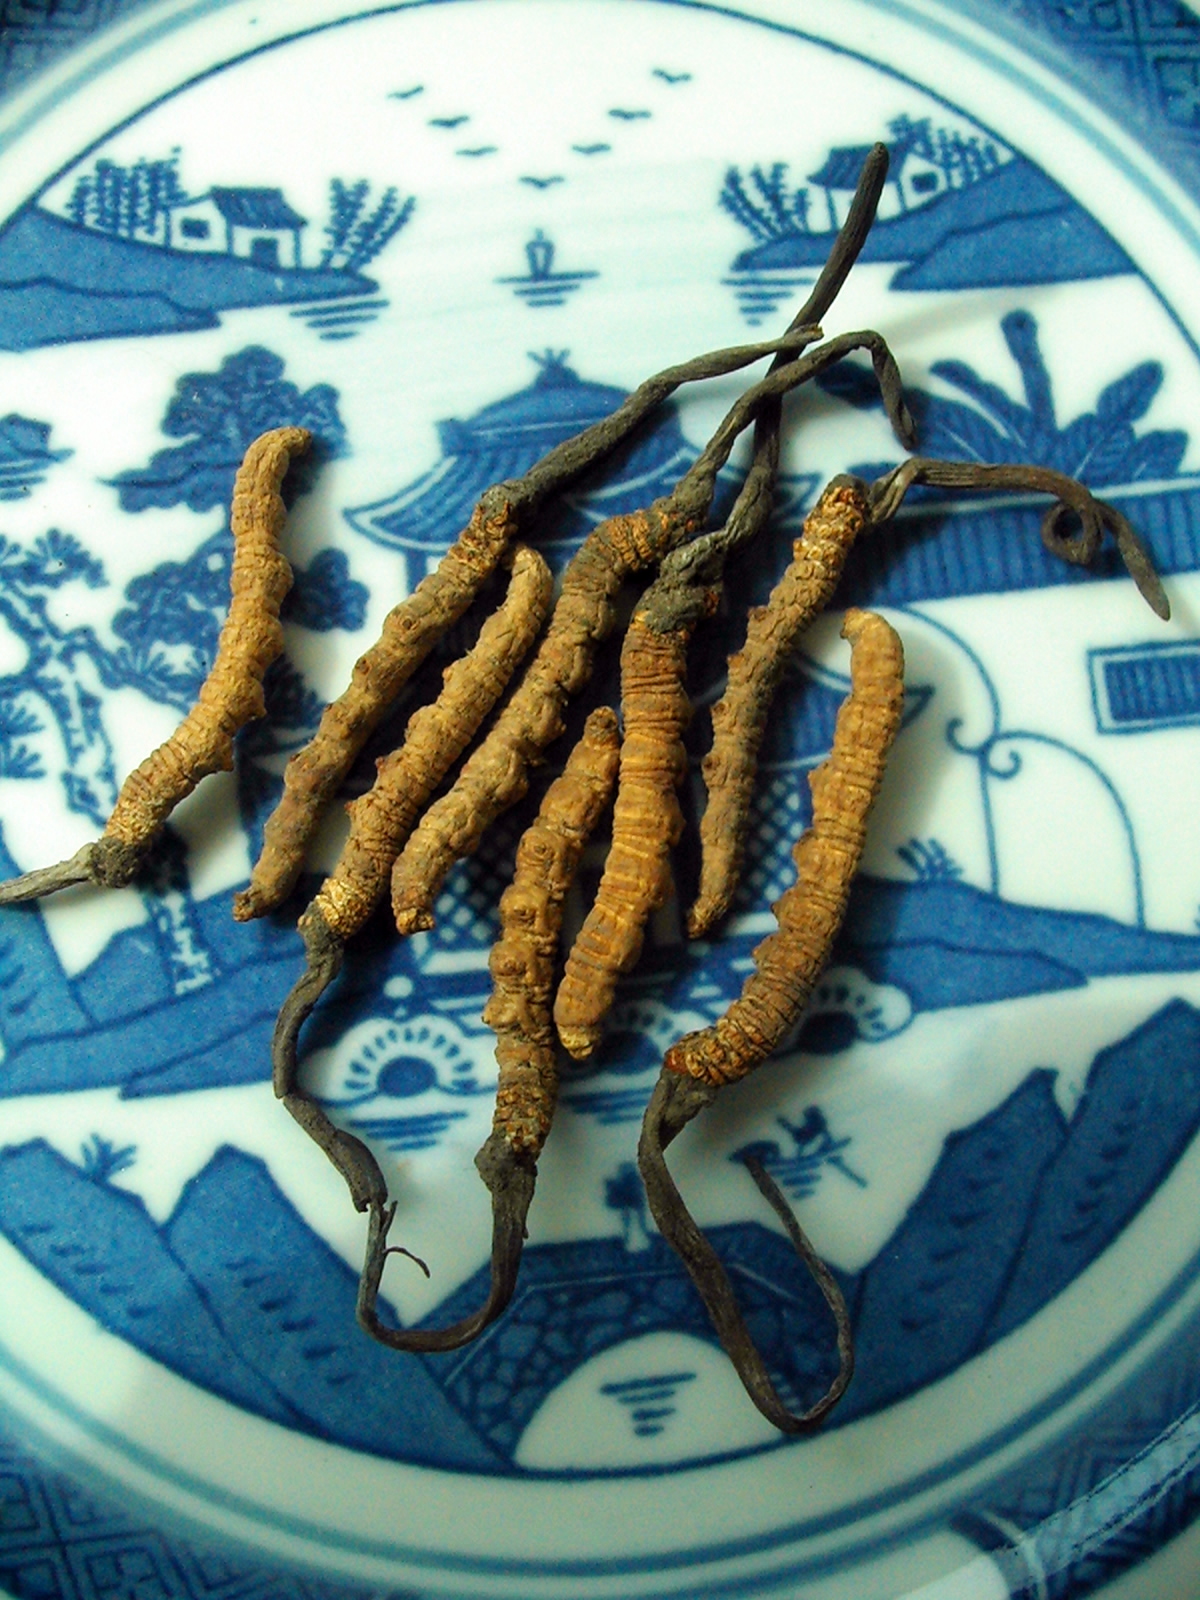 Cordyceps is a type of fungus that colonizes on caterpillars - HYY